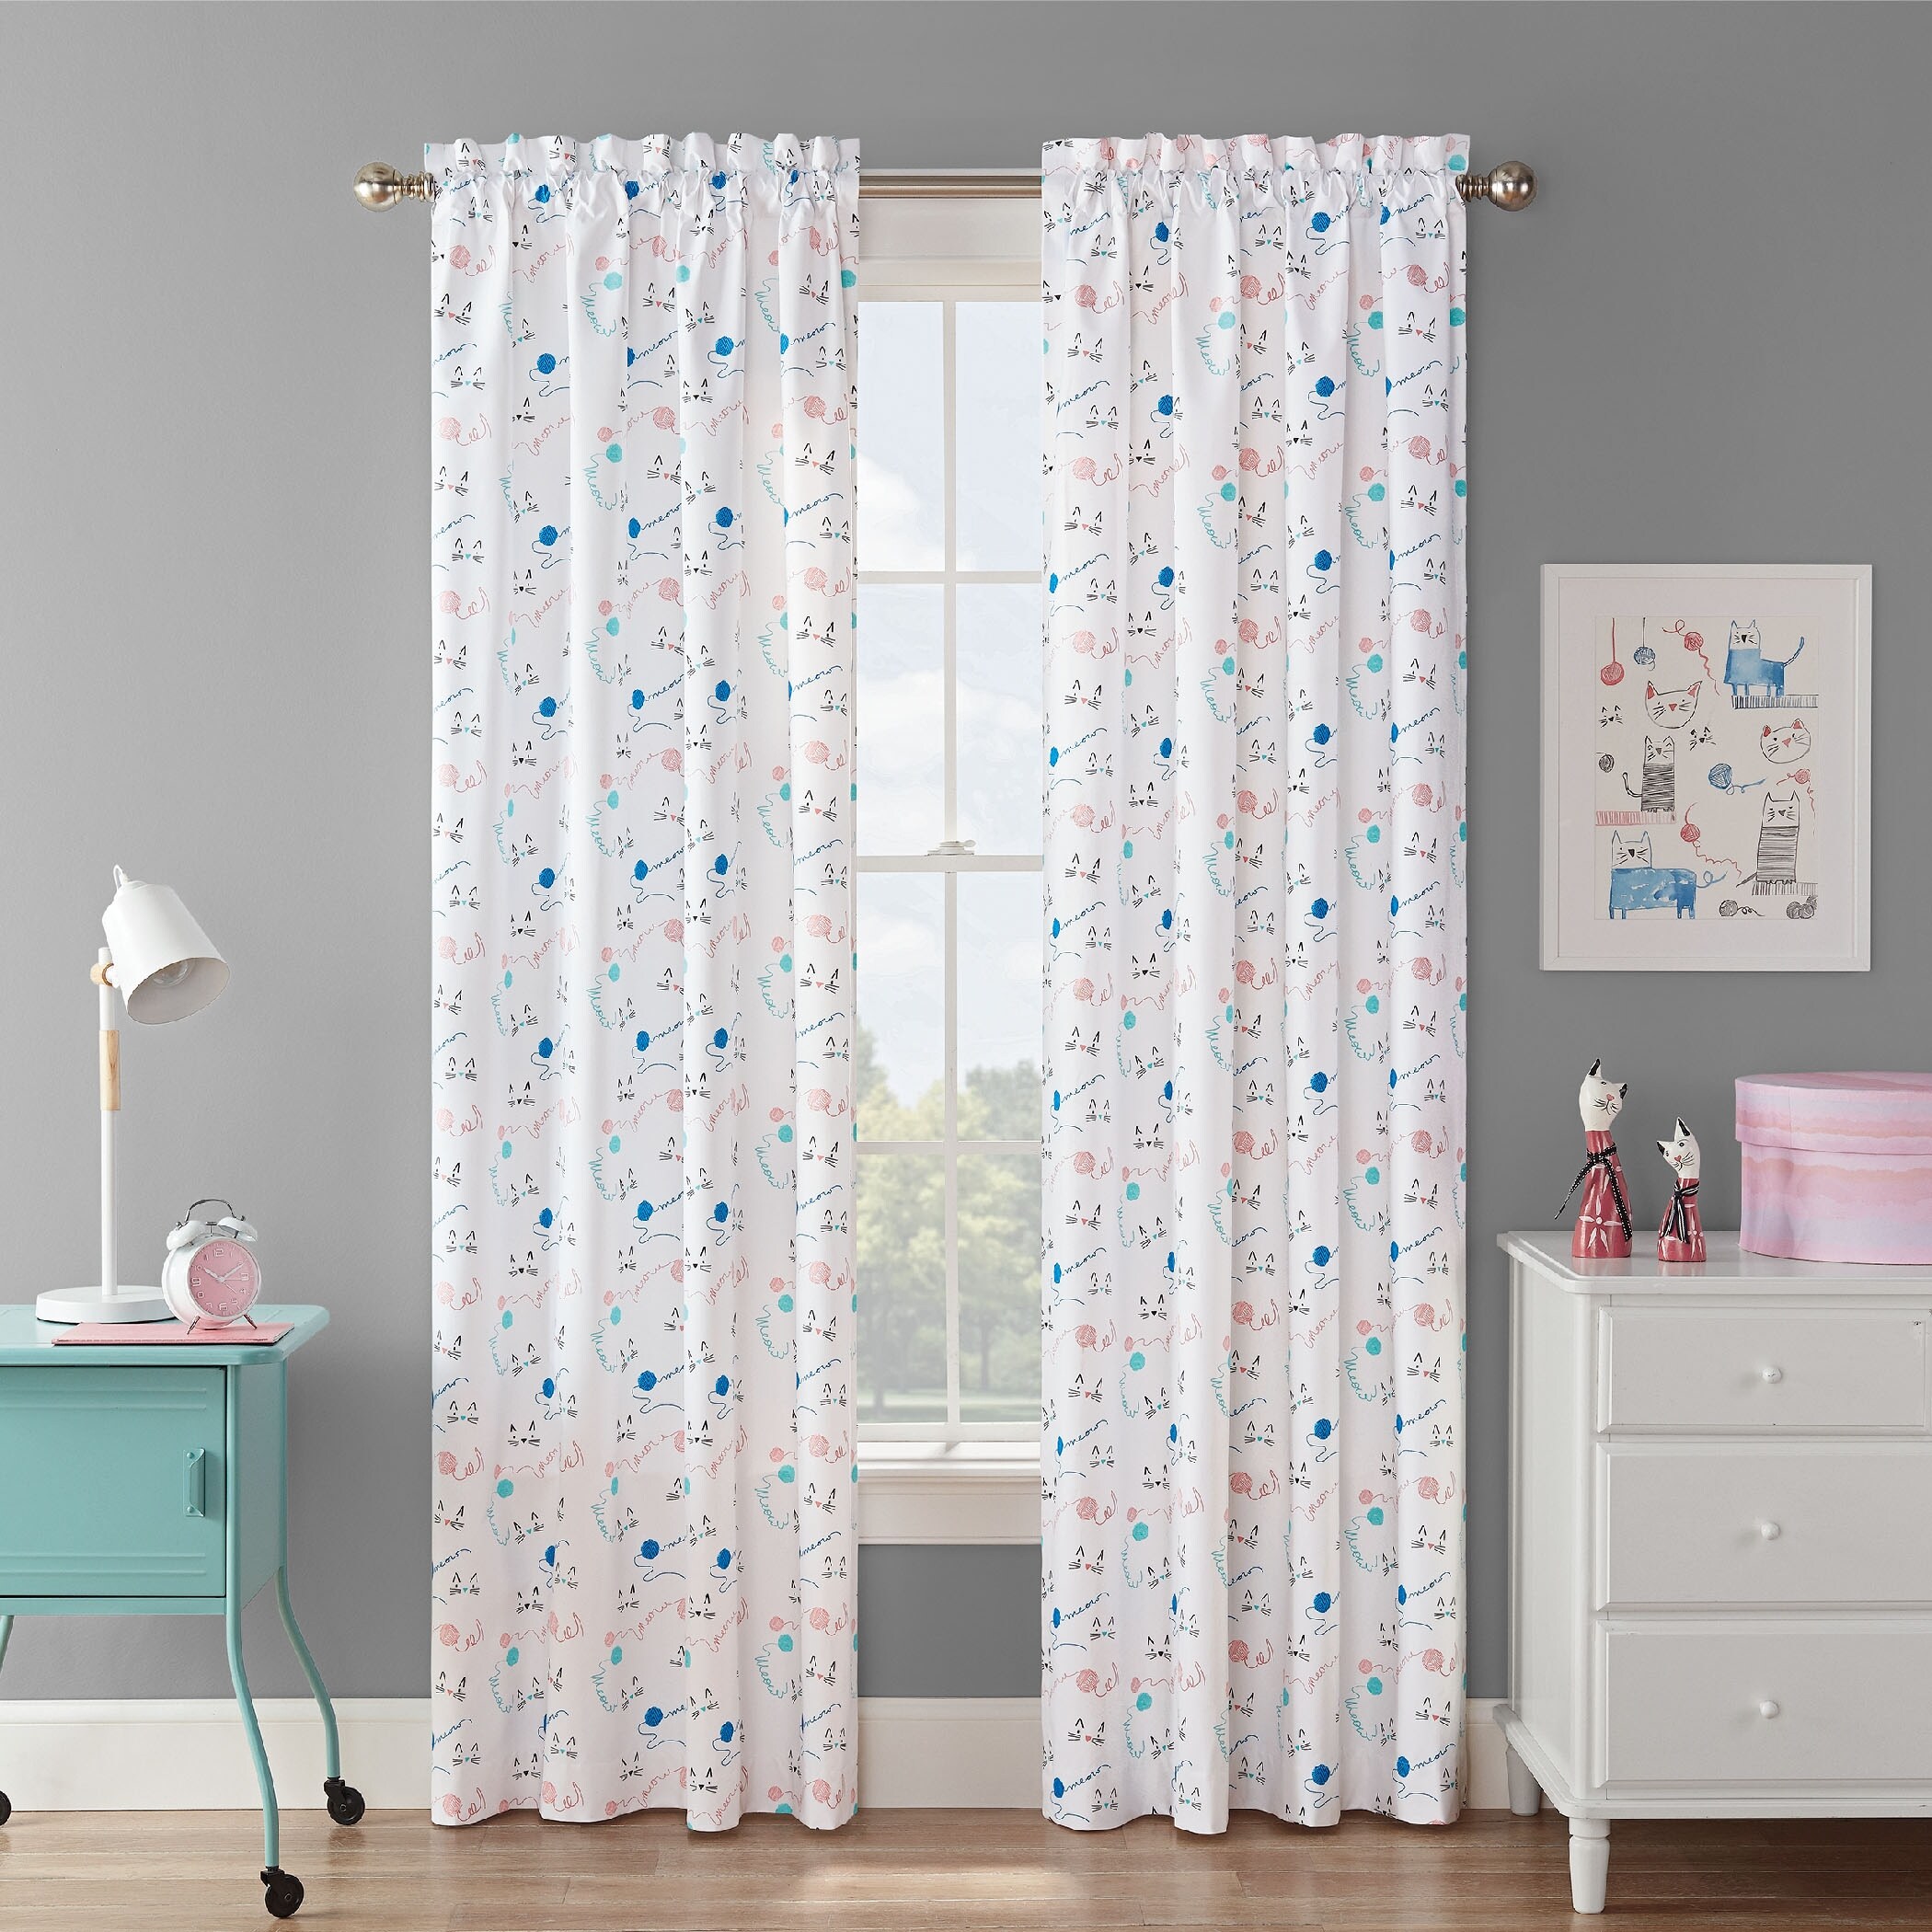 SWEET DREAMS READYMADE CURTAINS CHILDRENS BEDROOM 72" DROP 